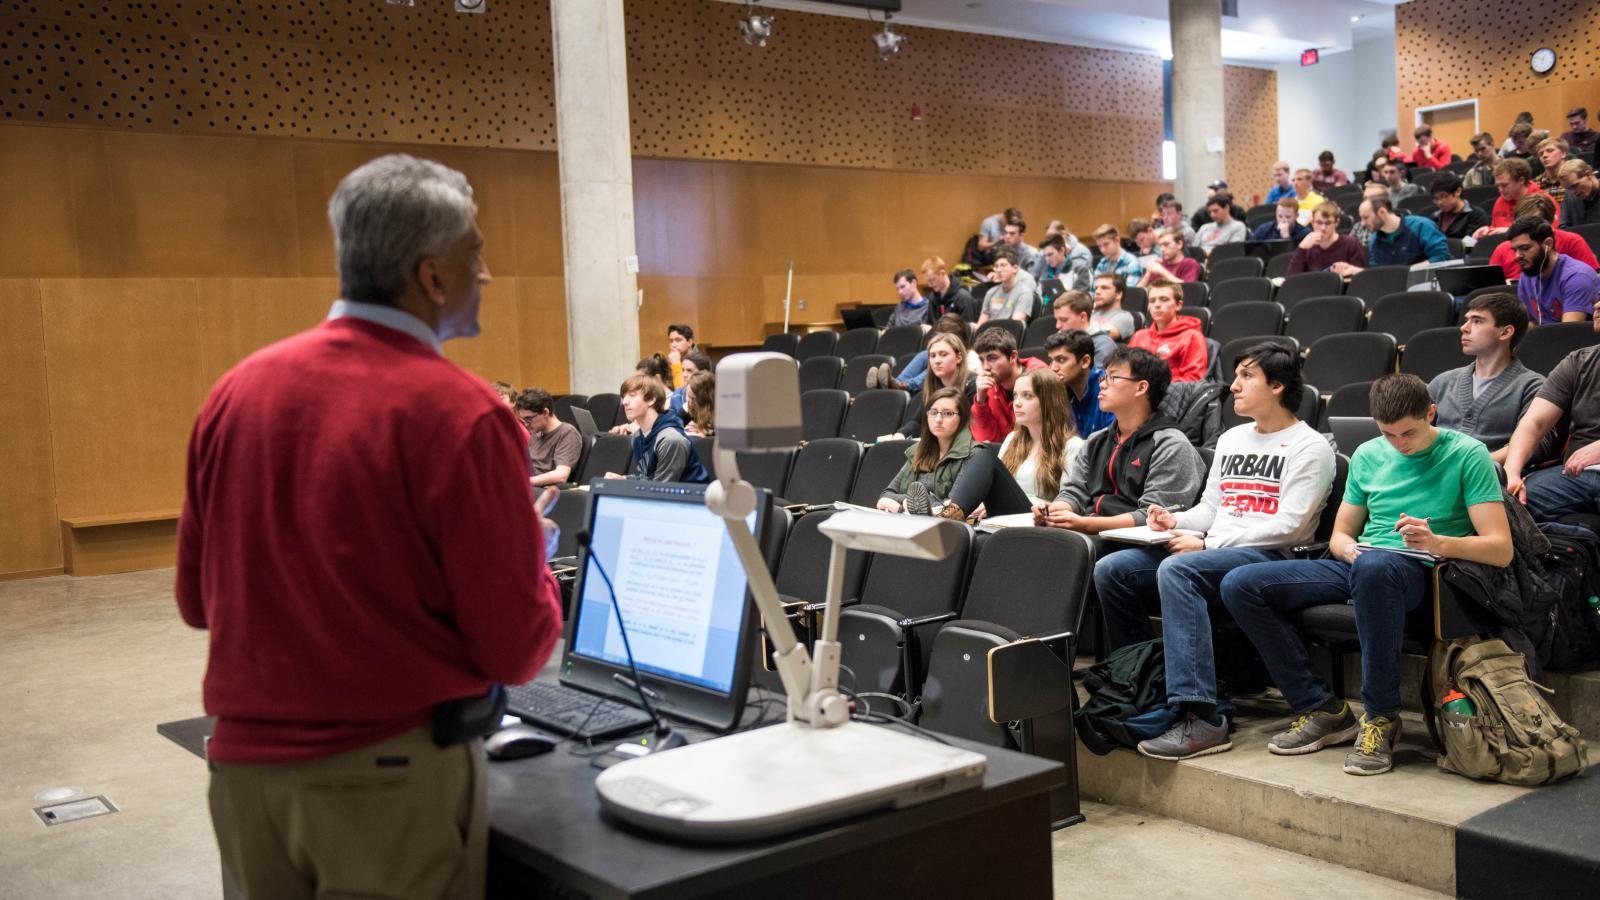 Professor standing in front of lecture hall full of students